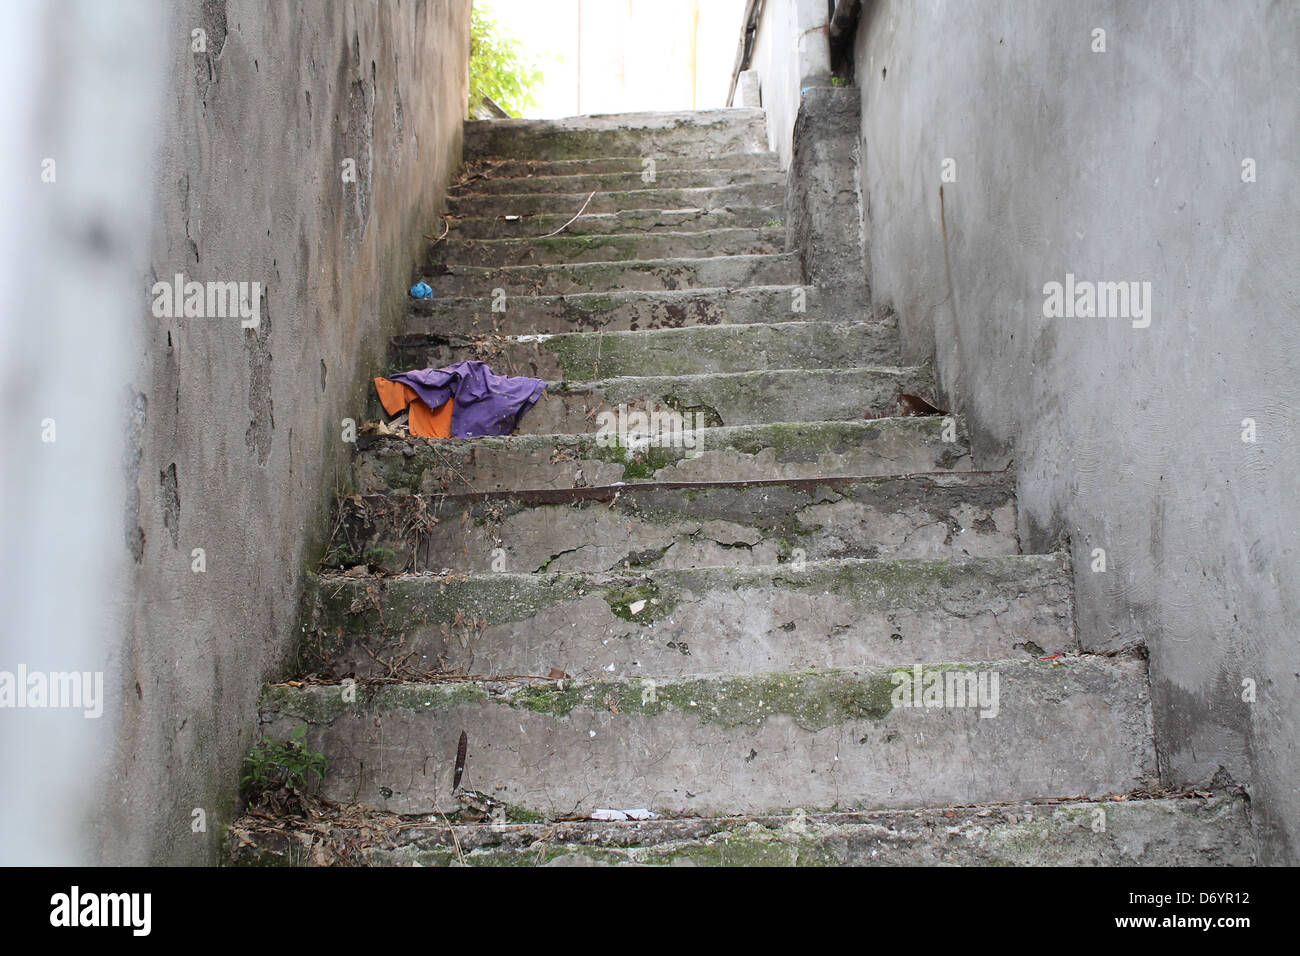 An Old stone staircase with abandoned clothing Stock Photo